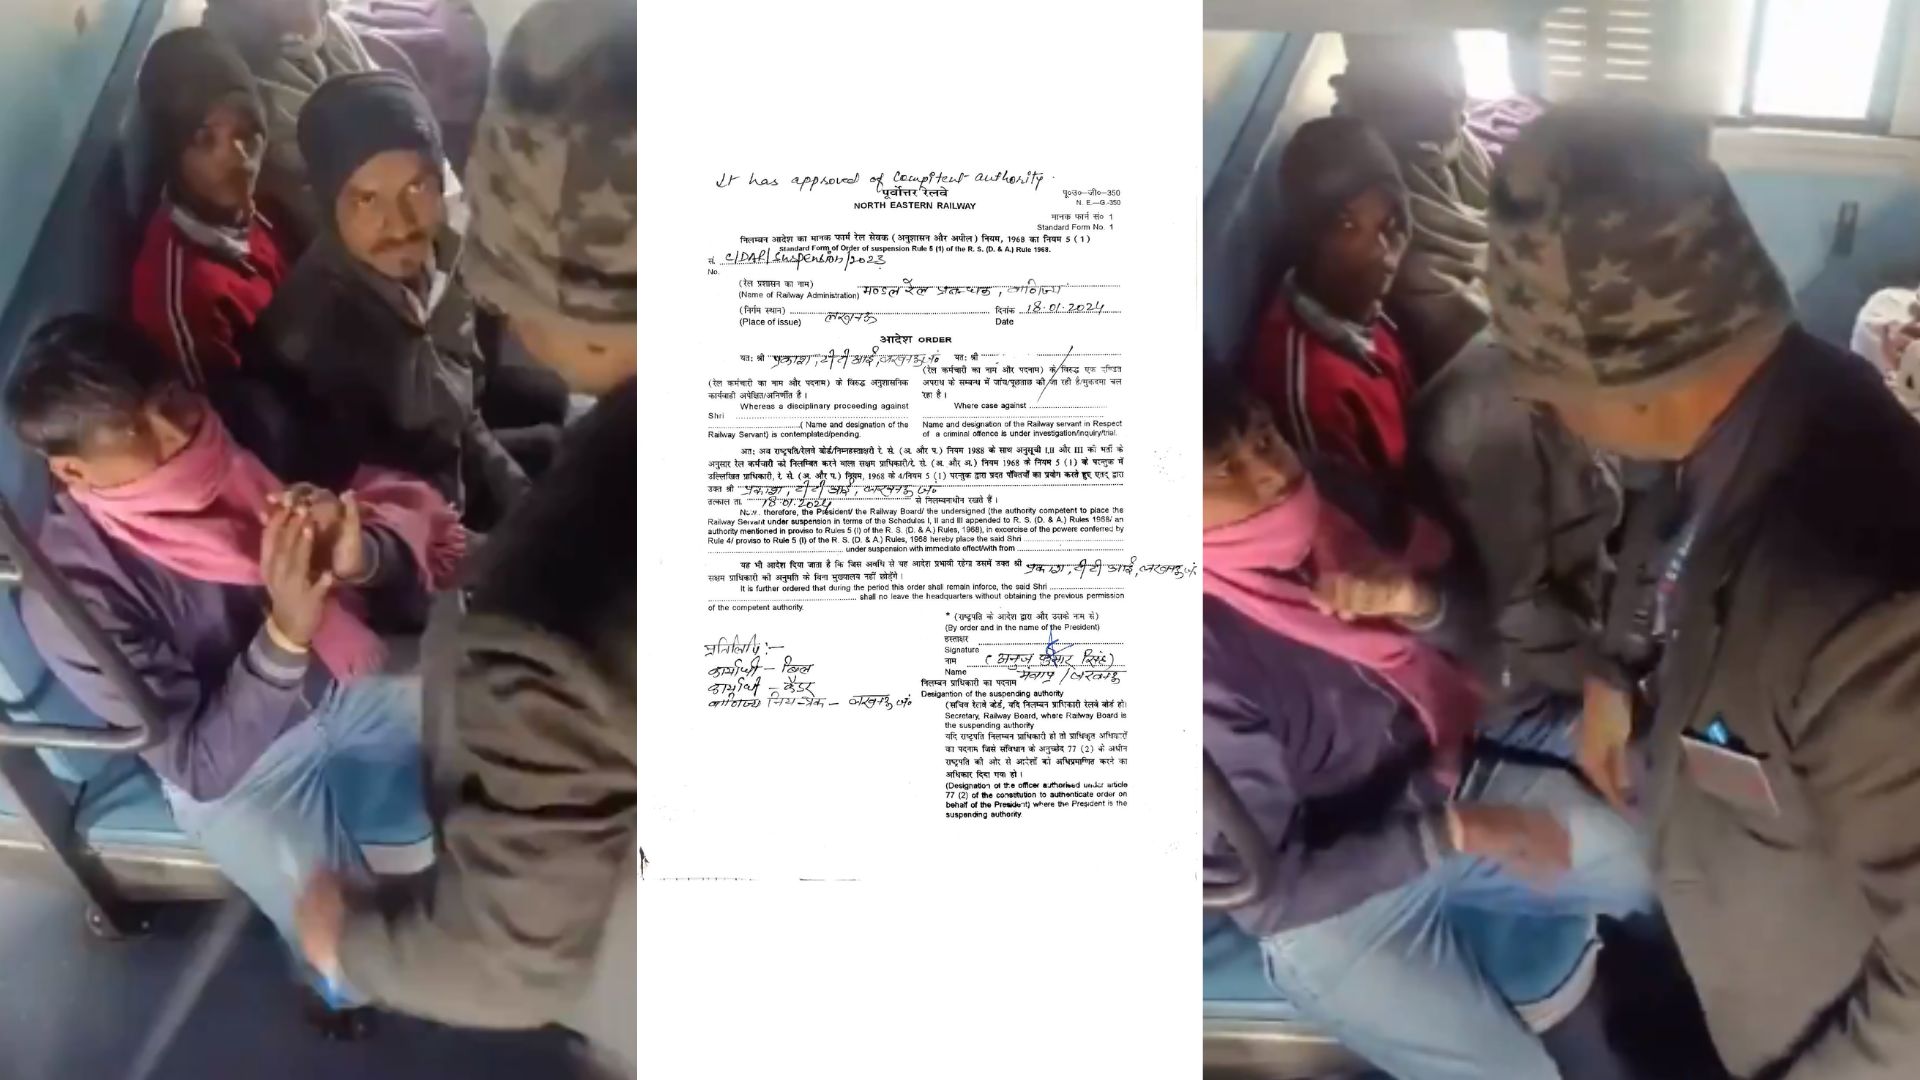 Watch: Rail Passenger Assaulted by TTE Onboard UP Train, Railway Official Suspended After Viral Video